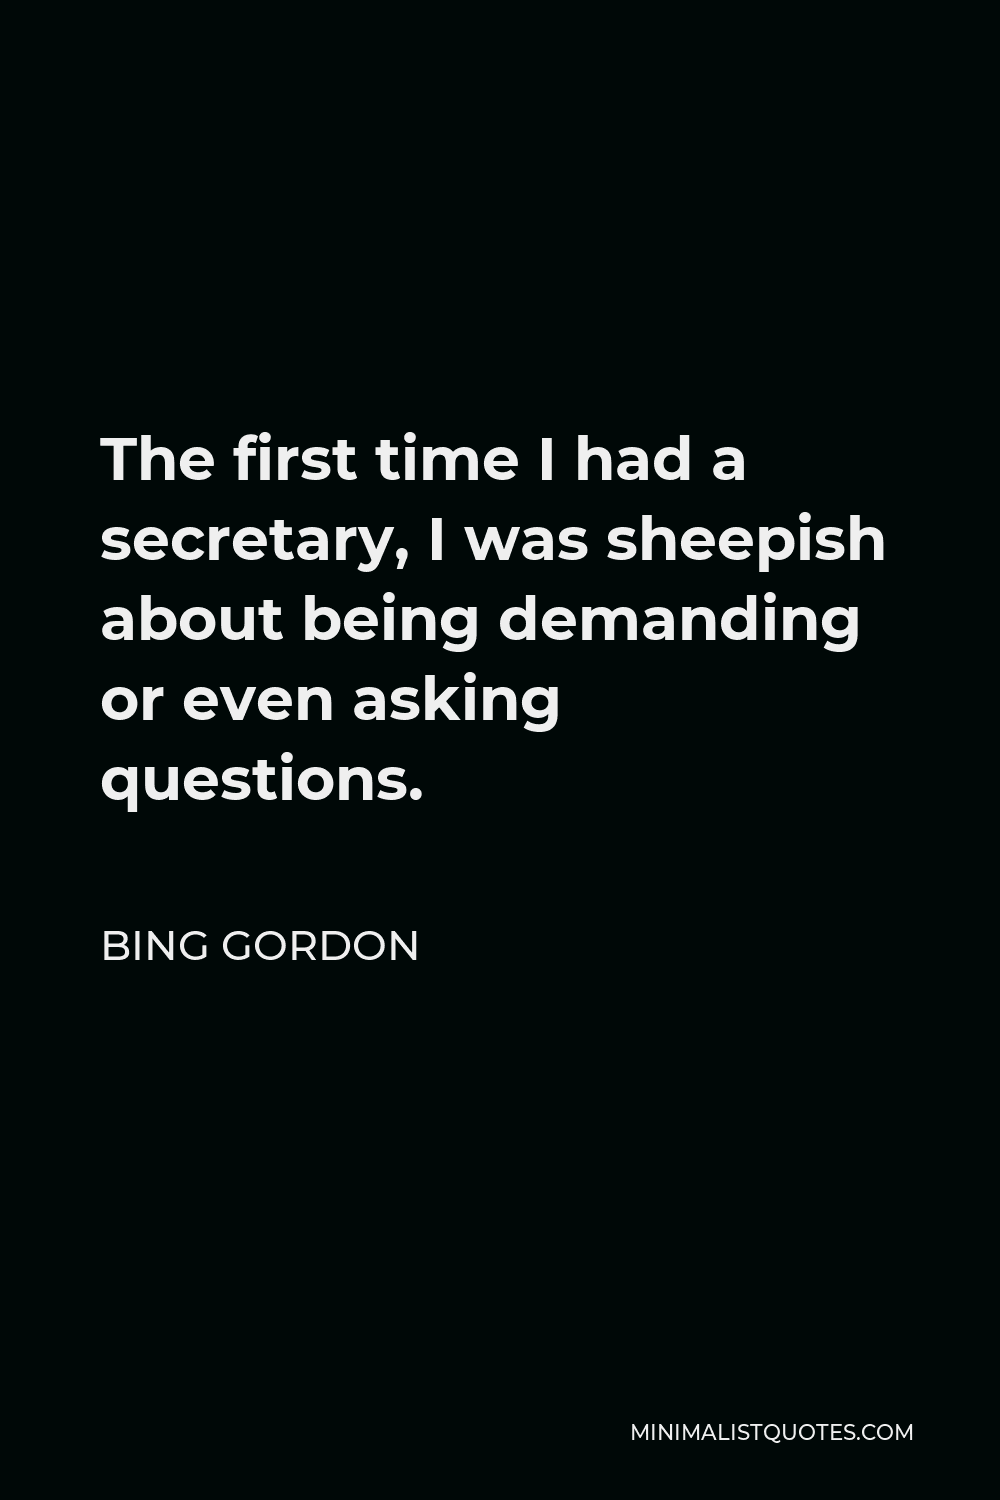 Bing Gordon Quote - The first time I had a secretary, I was sheepish about being demanding or even asking questions.